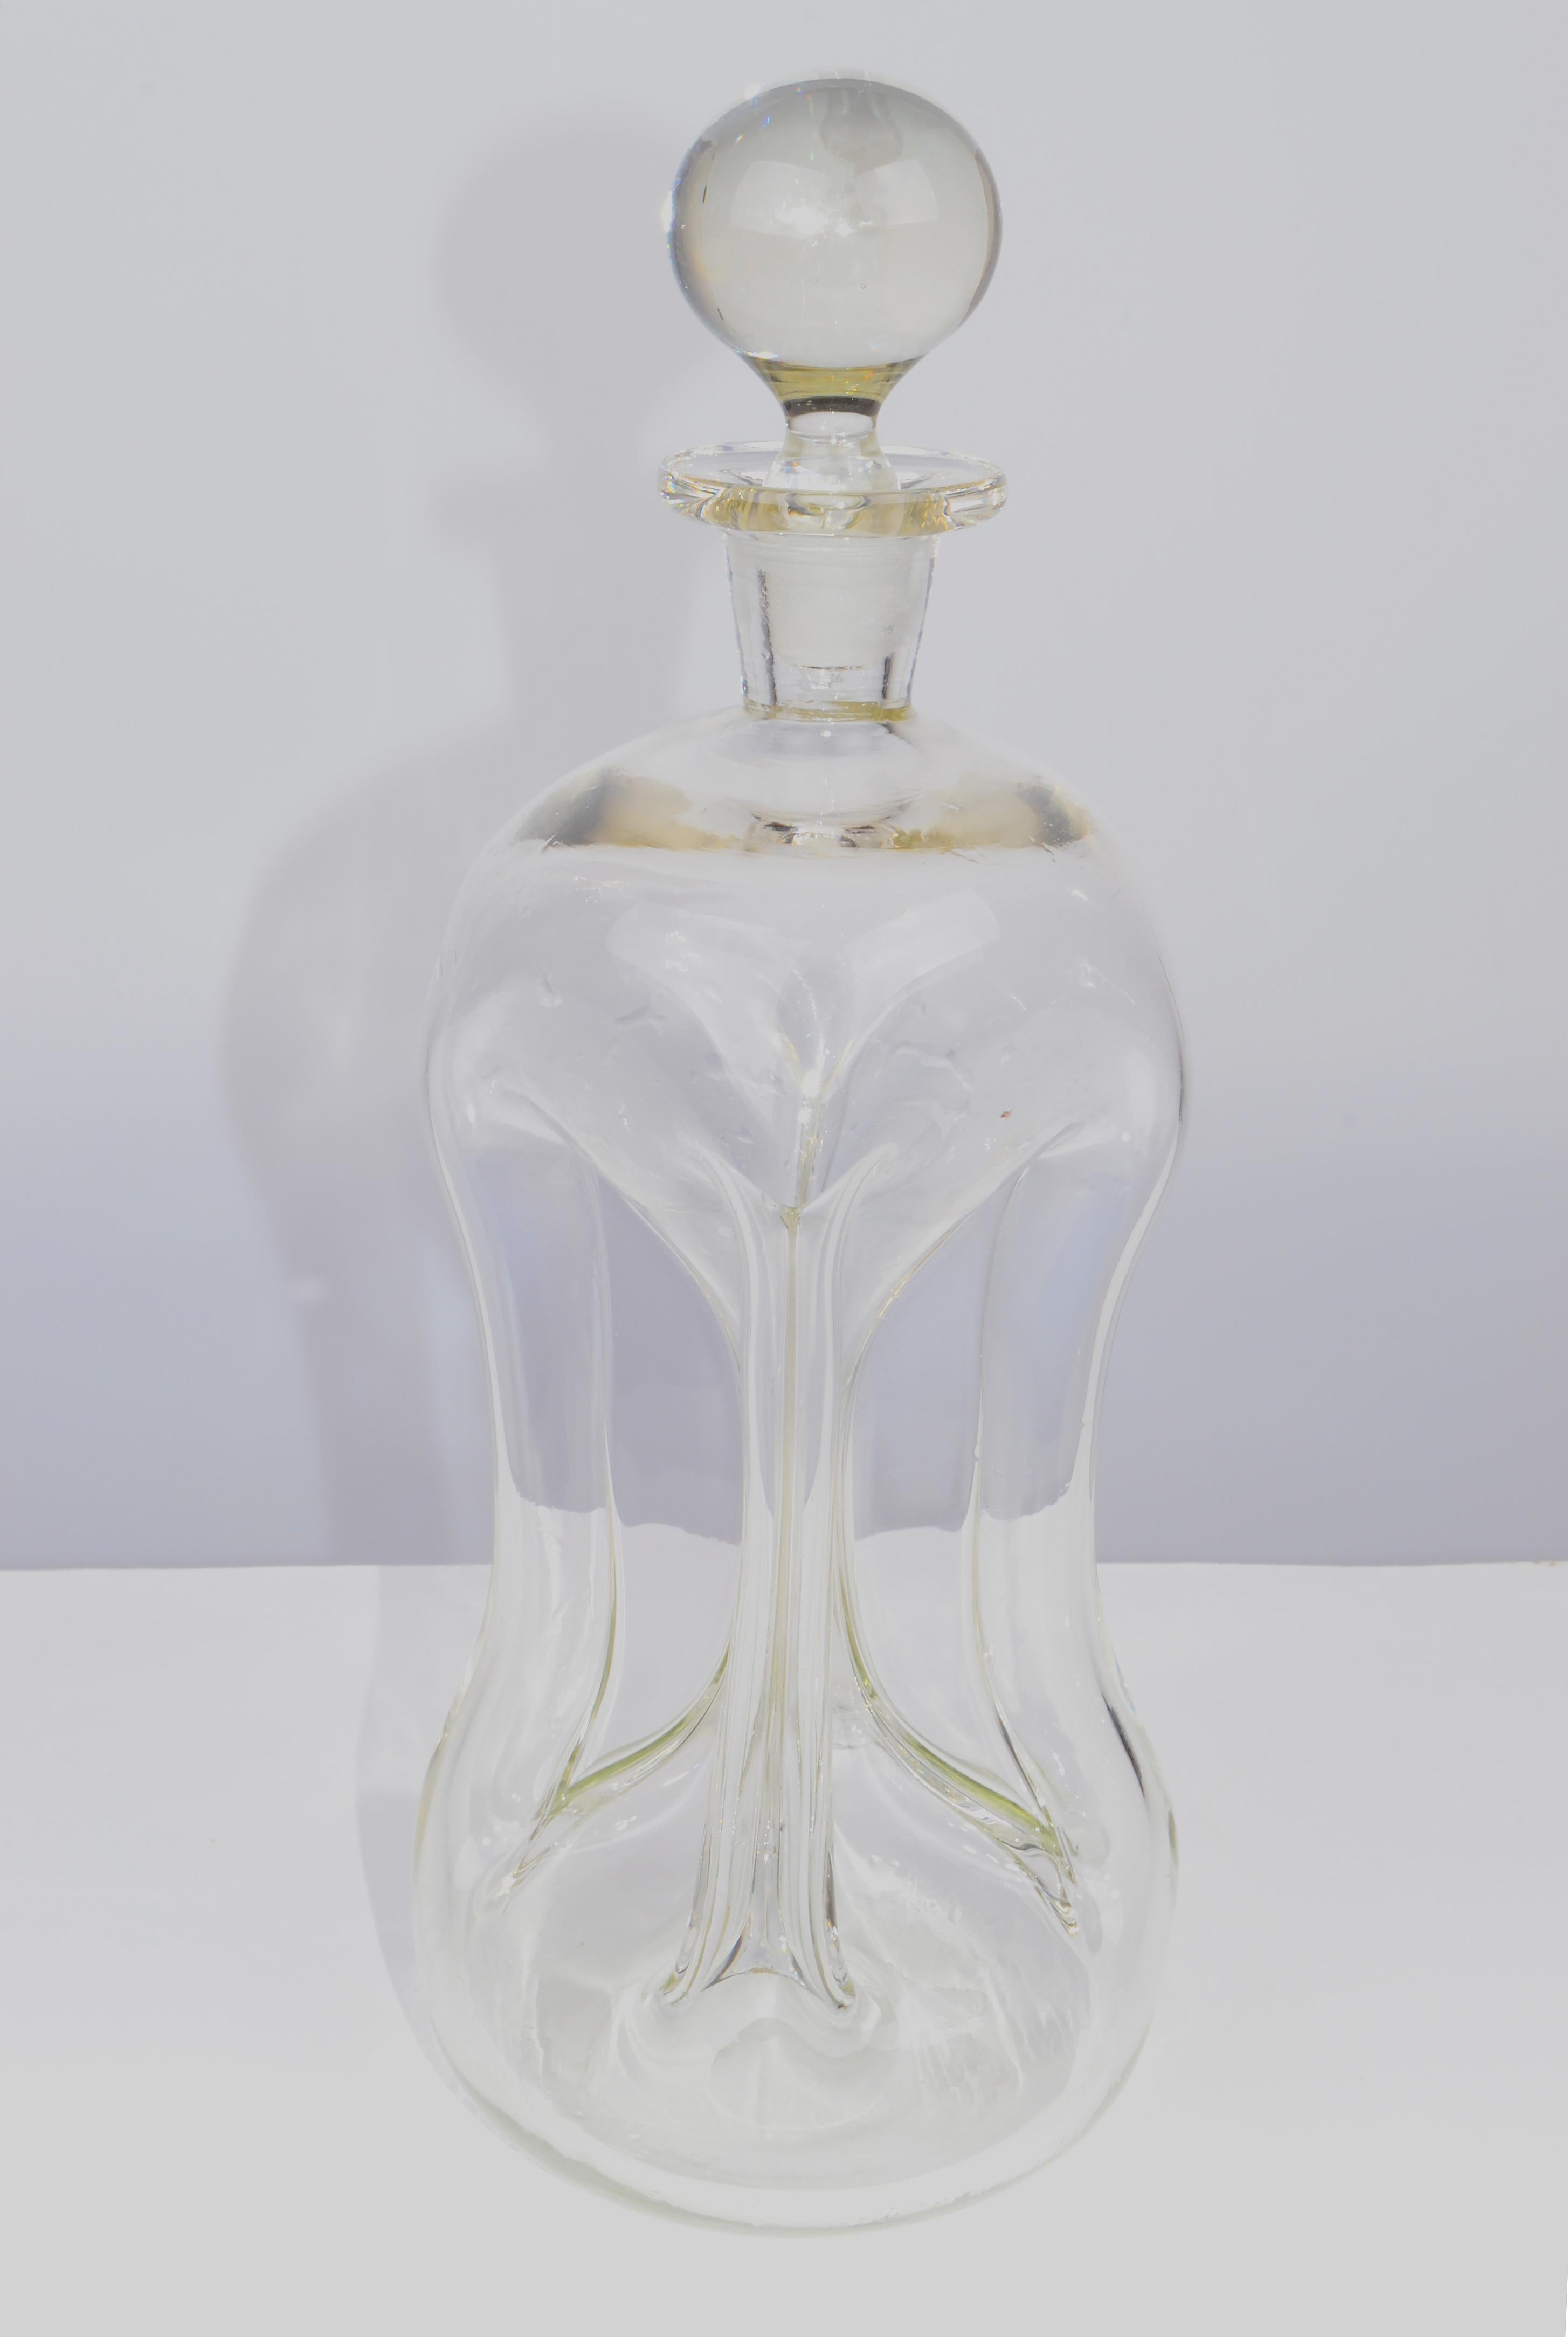 Large Kluk Kluk Glass Decanter Holmegaard designed By Jacob Eiler Bang Denmark In Good Condition For Sale In Miami, FL